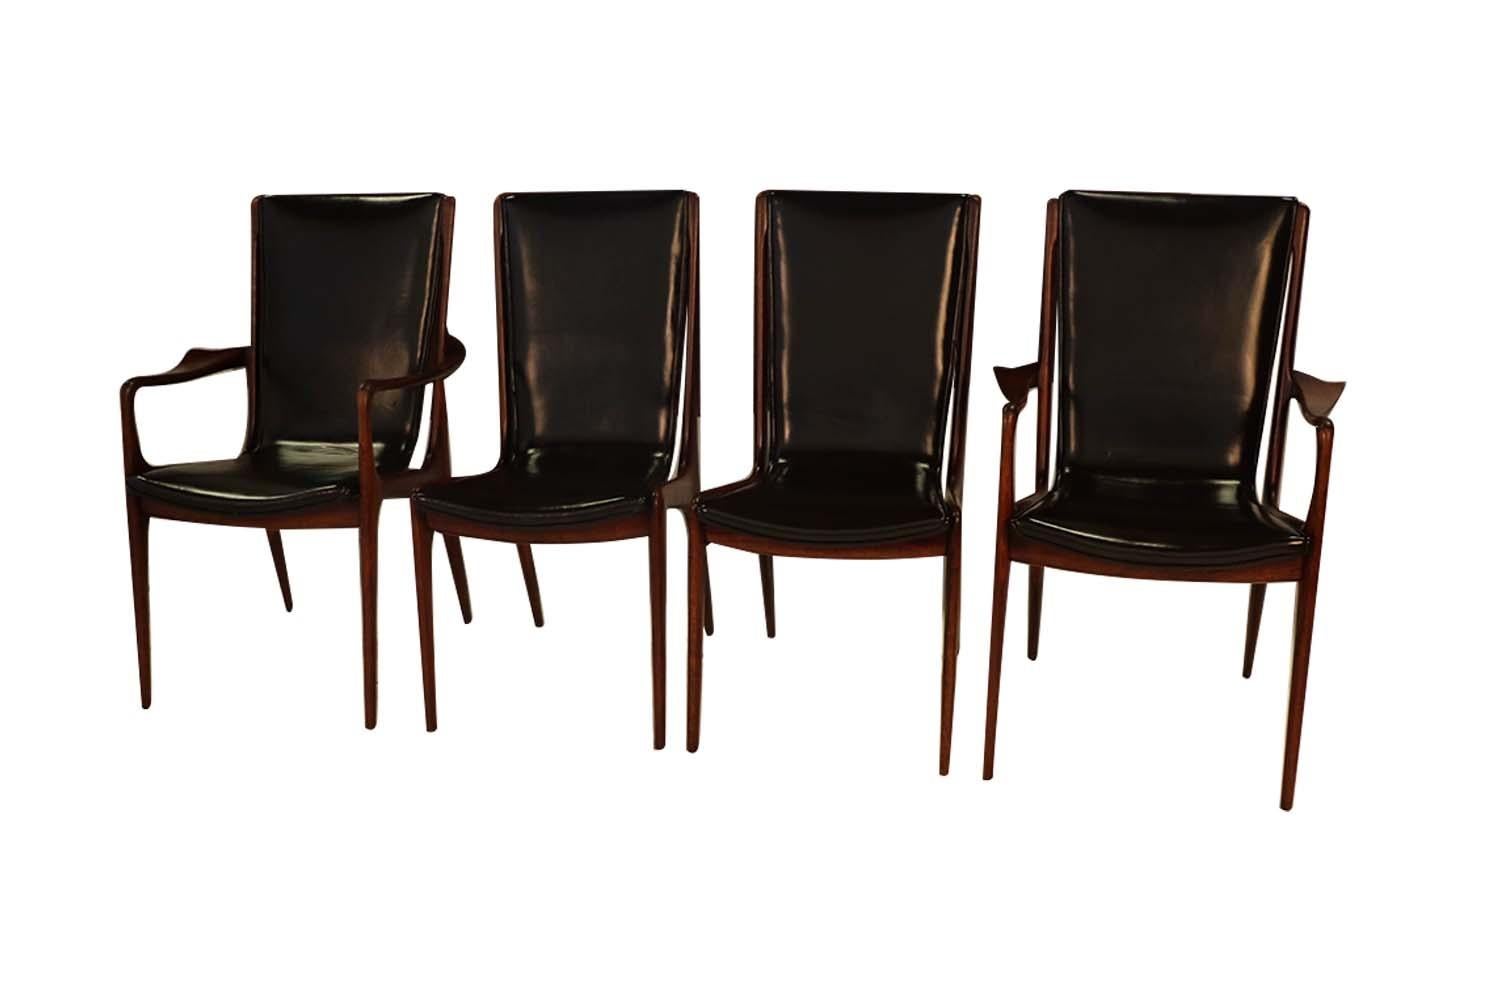 A beautiful rare set of four American walnut, Vladimir Kagan sculpted sling dining chairs, in black leather. This spectacular set of American walnut dining chairs consists of two VK 101 side chairs, and two VK 101A arm chairs. Signed with branded